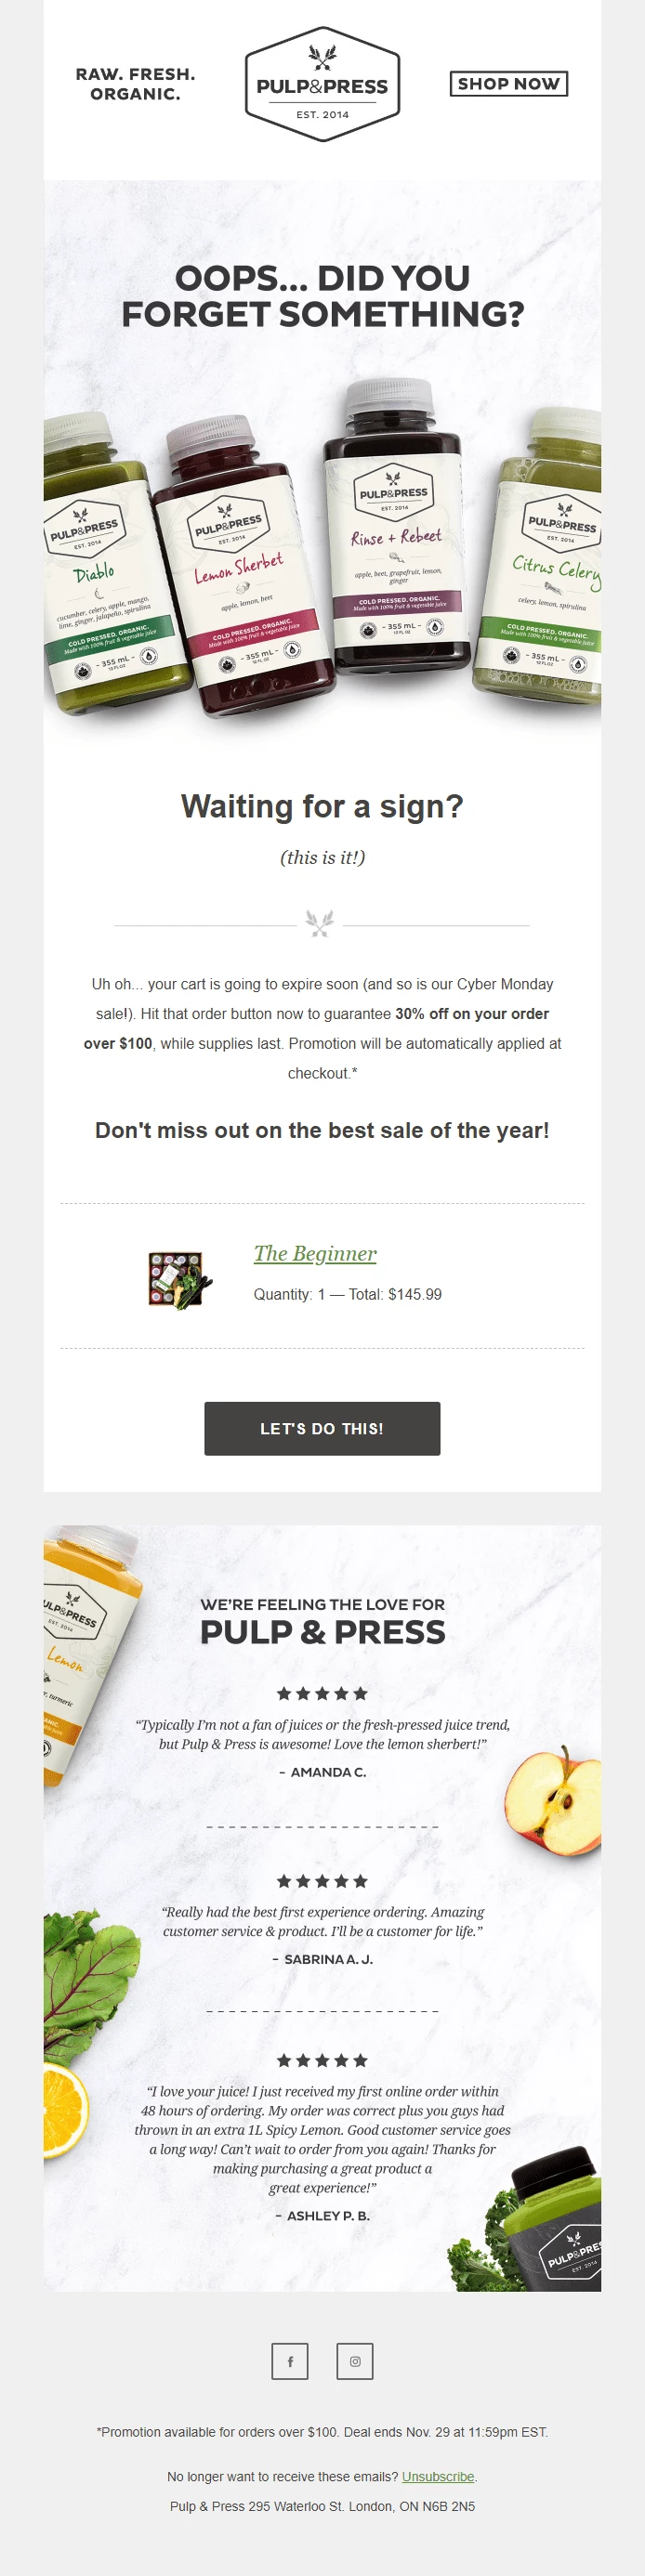 Abandoned cart email example from Pulp & Press